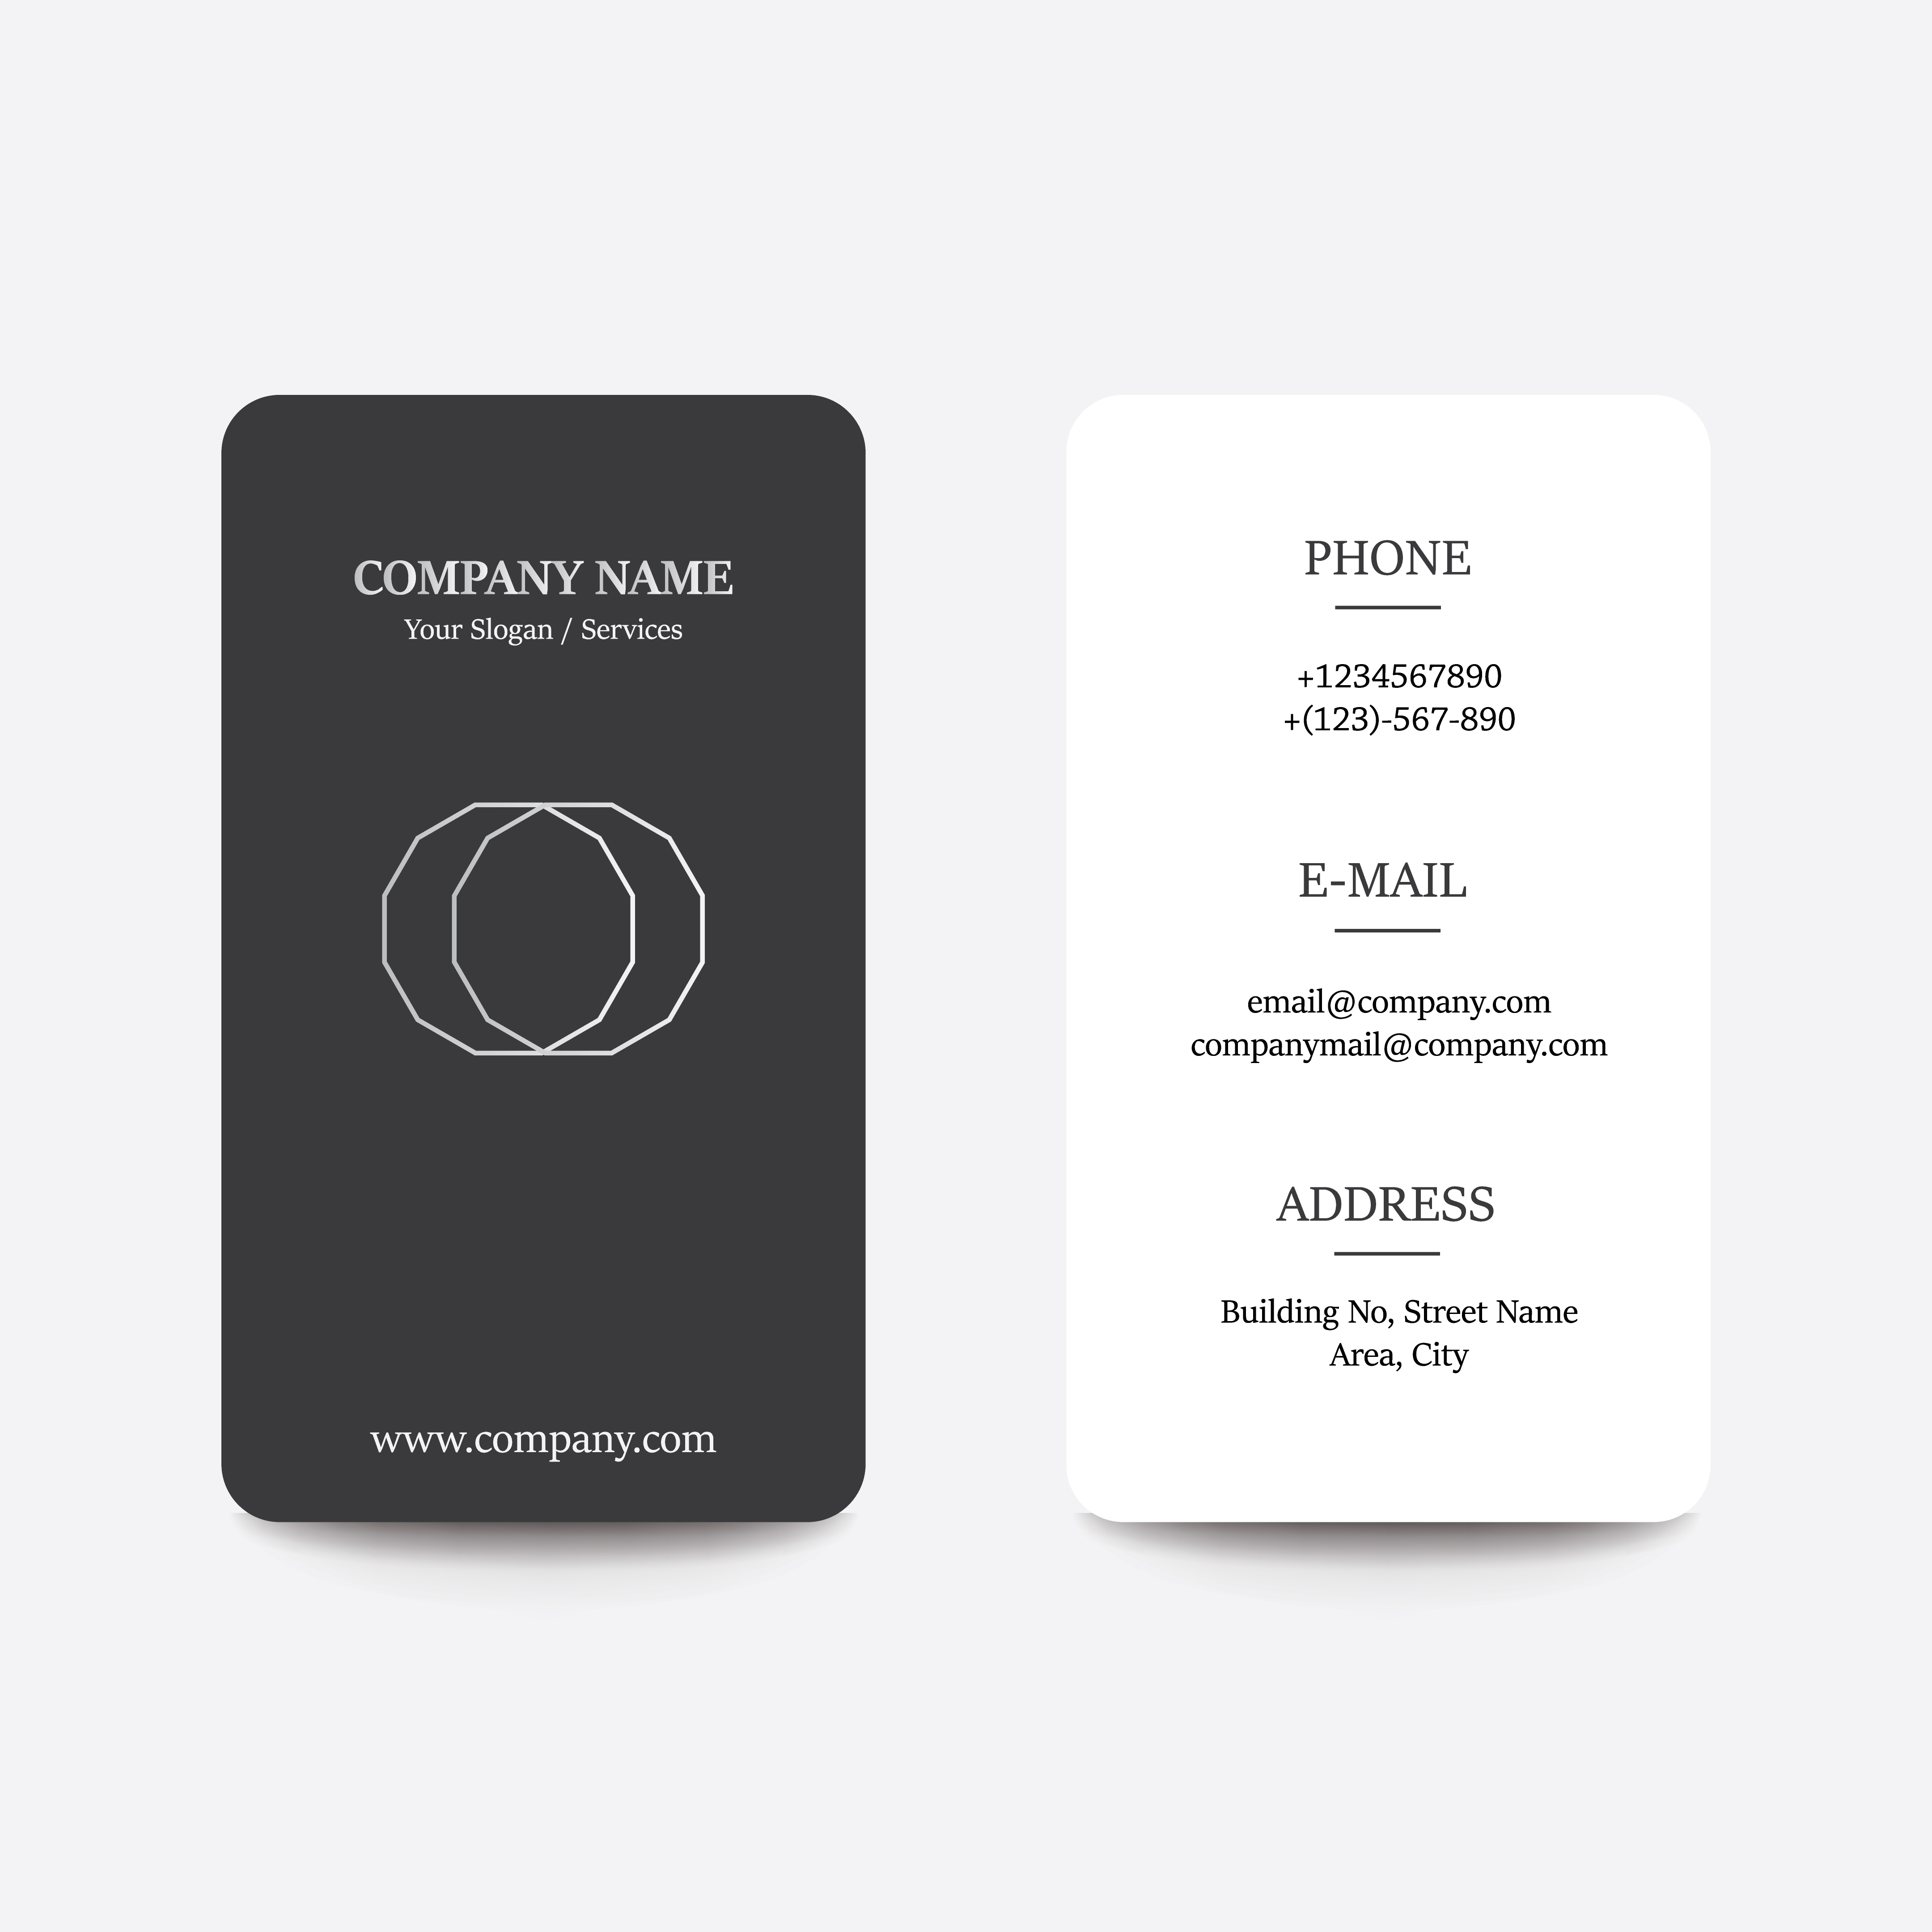 Clean Flat Design Black and White Style two Business Visiting Card.jpg